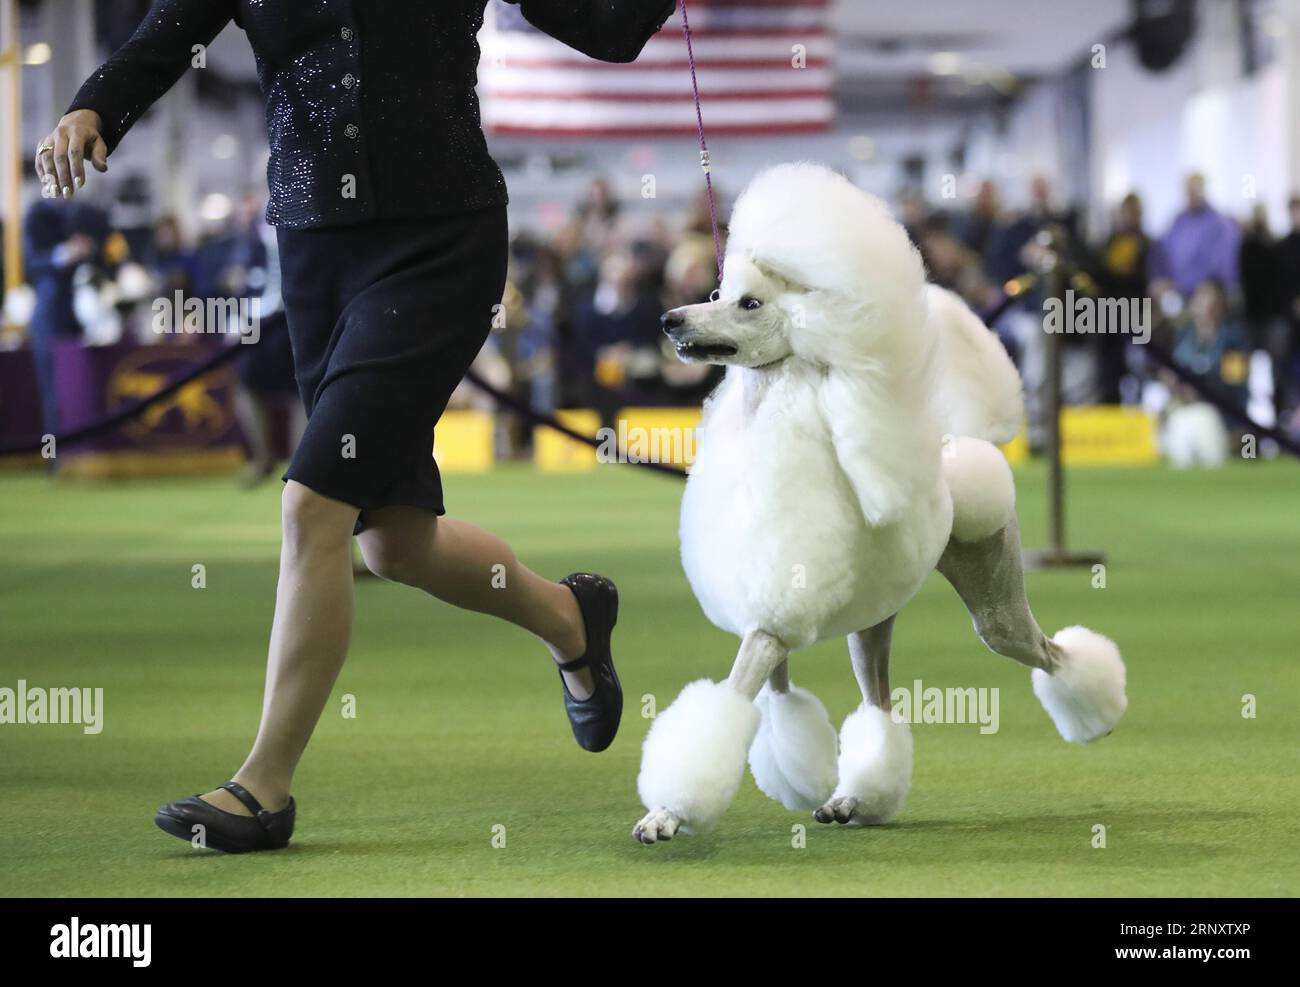 (180213) -- NEW YORK, Feb. 13, 2018 -- A Standard Poodle is seen during the 2018 Westminster Kennel Club Dog Show in New York, the United States, Feb. 12, 2018. Around 2800 dogs of over 200 breeds from all over the world participated in the show this year. ) (zy) U.S.-NEW YORK-DOG SHOW WangxYing PUBLICATIONxNOTxINxCHN Stock Photo